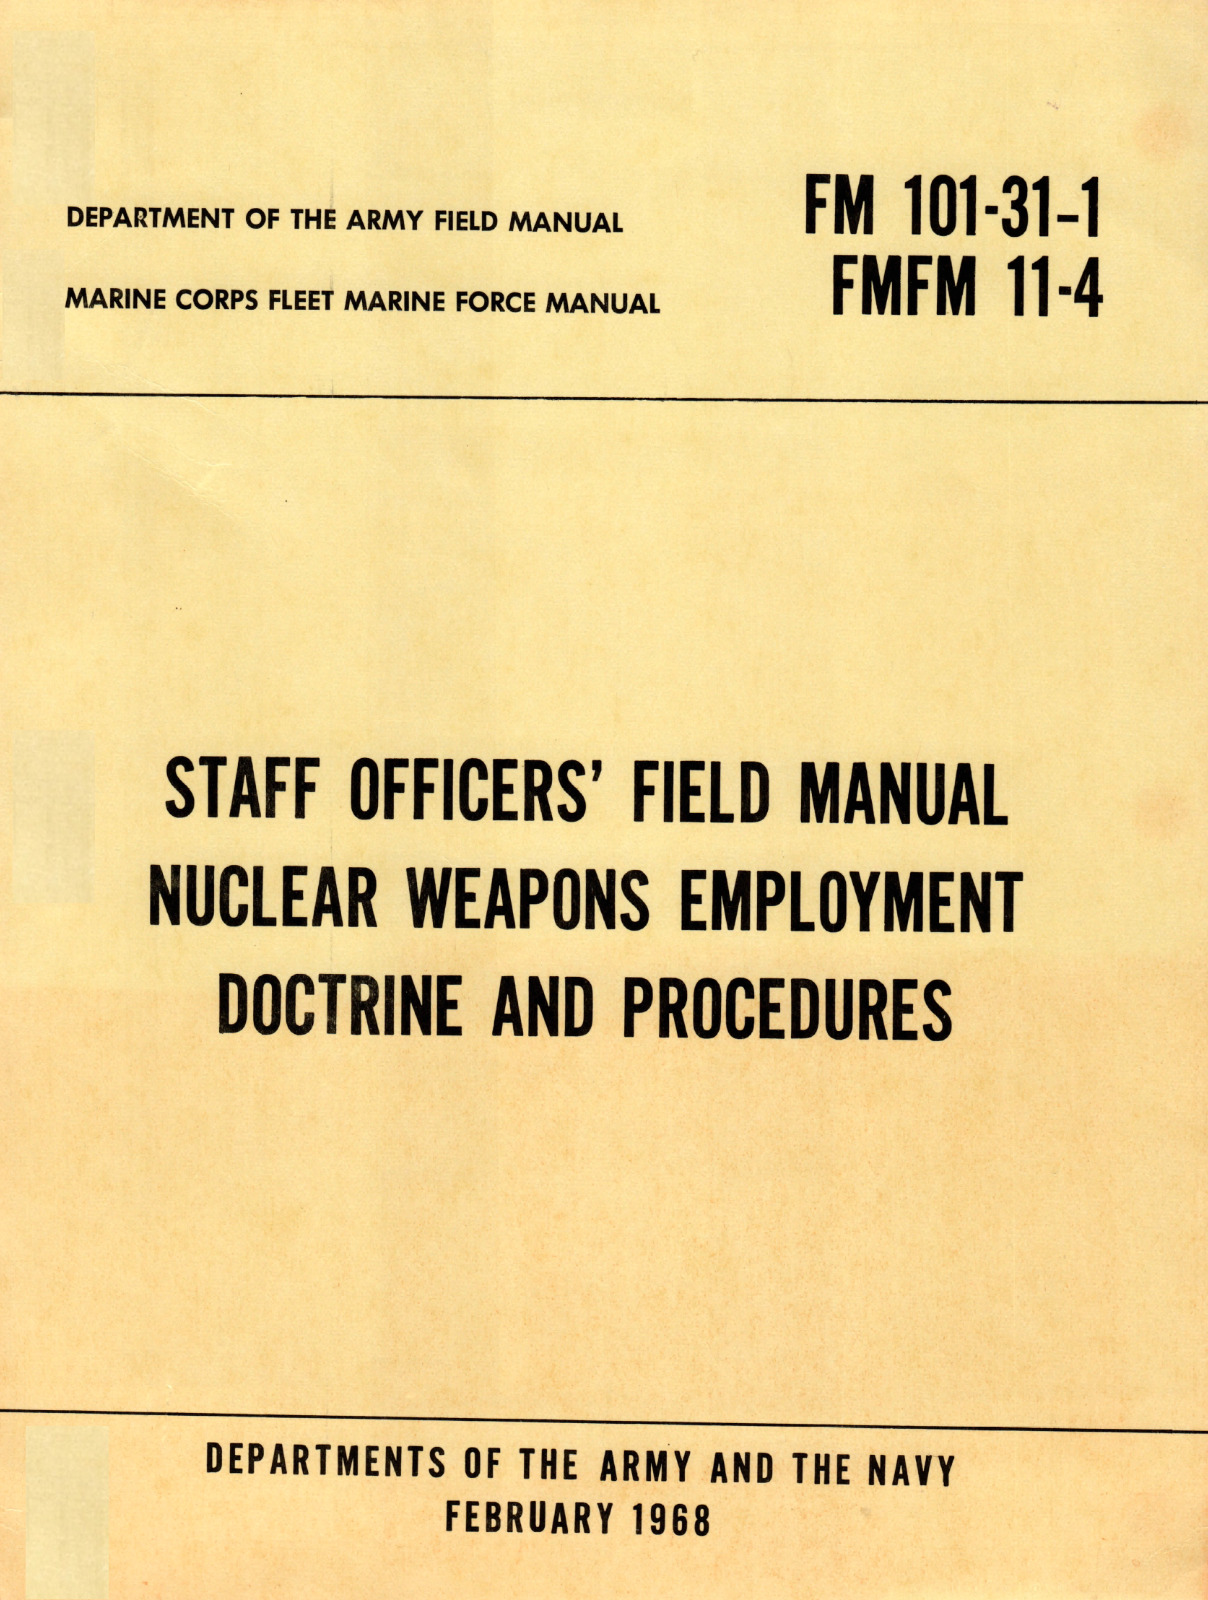 226 Page 1968 FM 101-31-1 NUCLEAR WEAPONS EMPLOYMENT PROCEDURES War on Data CD